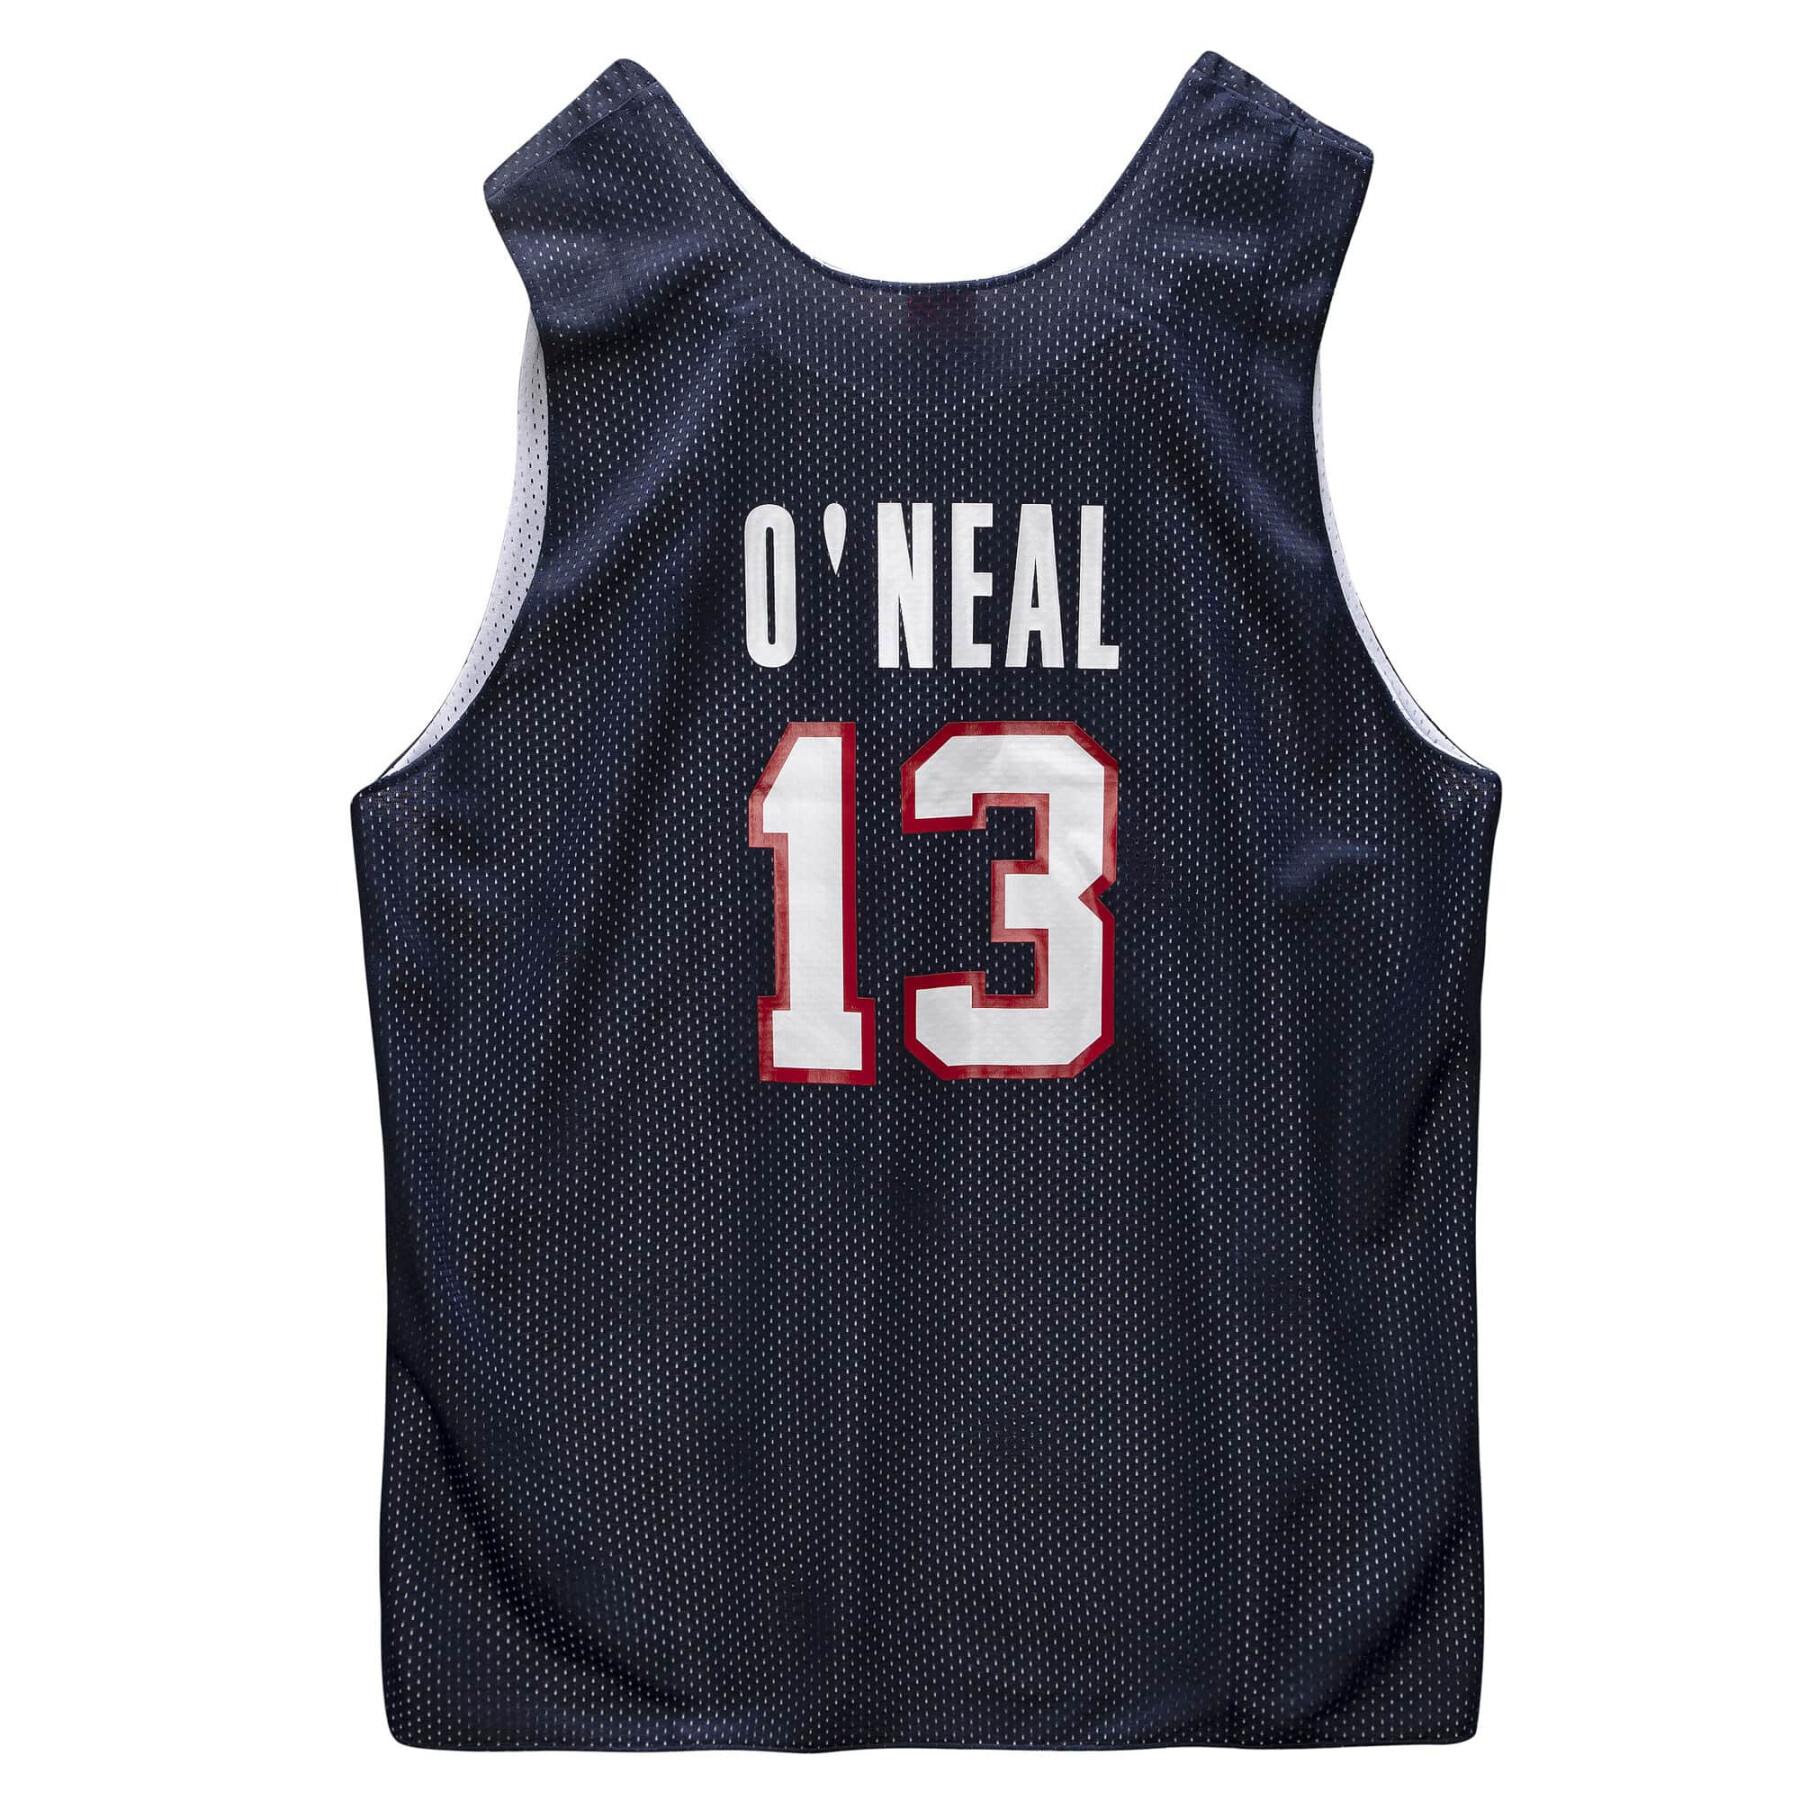 Maillot USA authentic